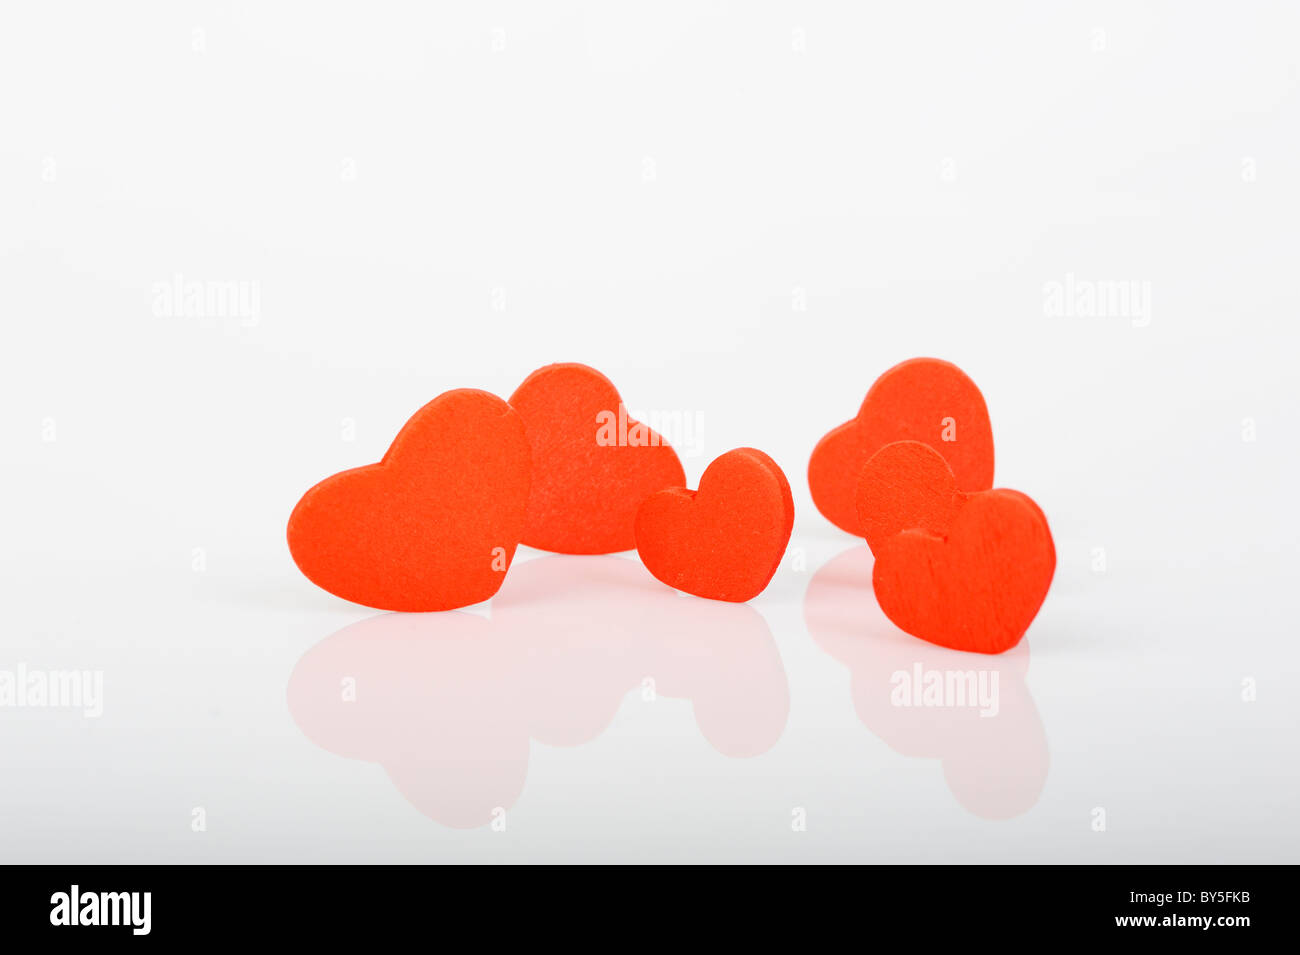 Stock photo red love hearts displayed on a white background. Stock Photo